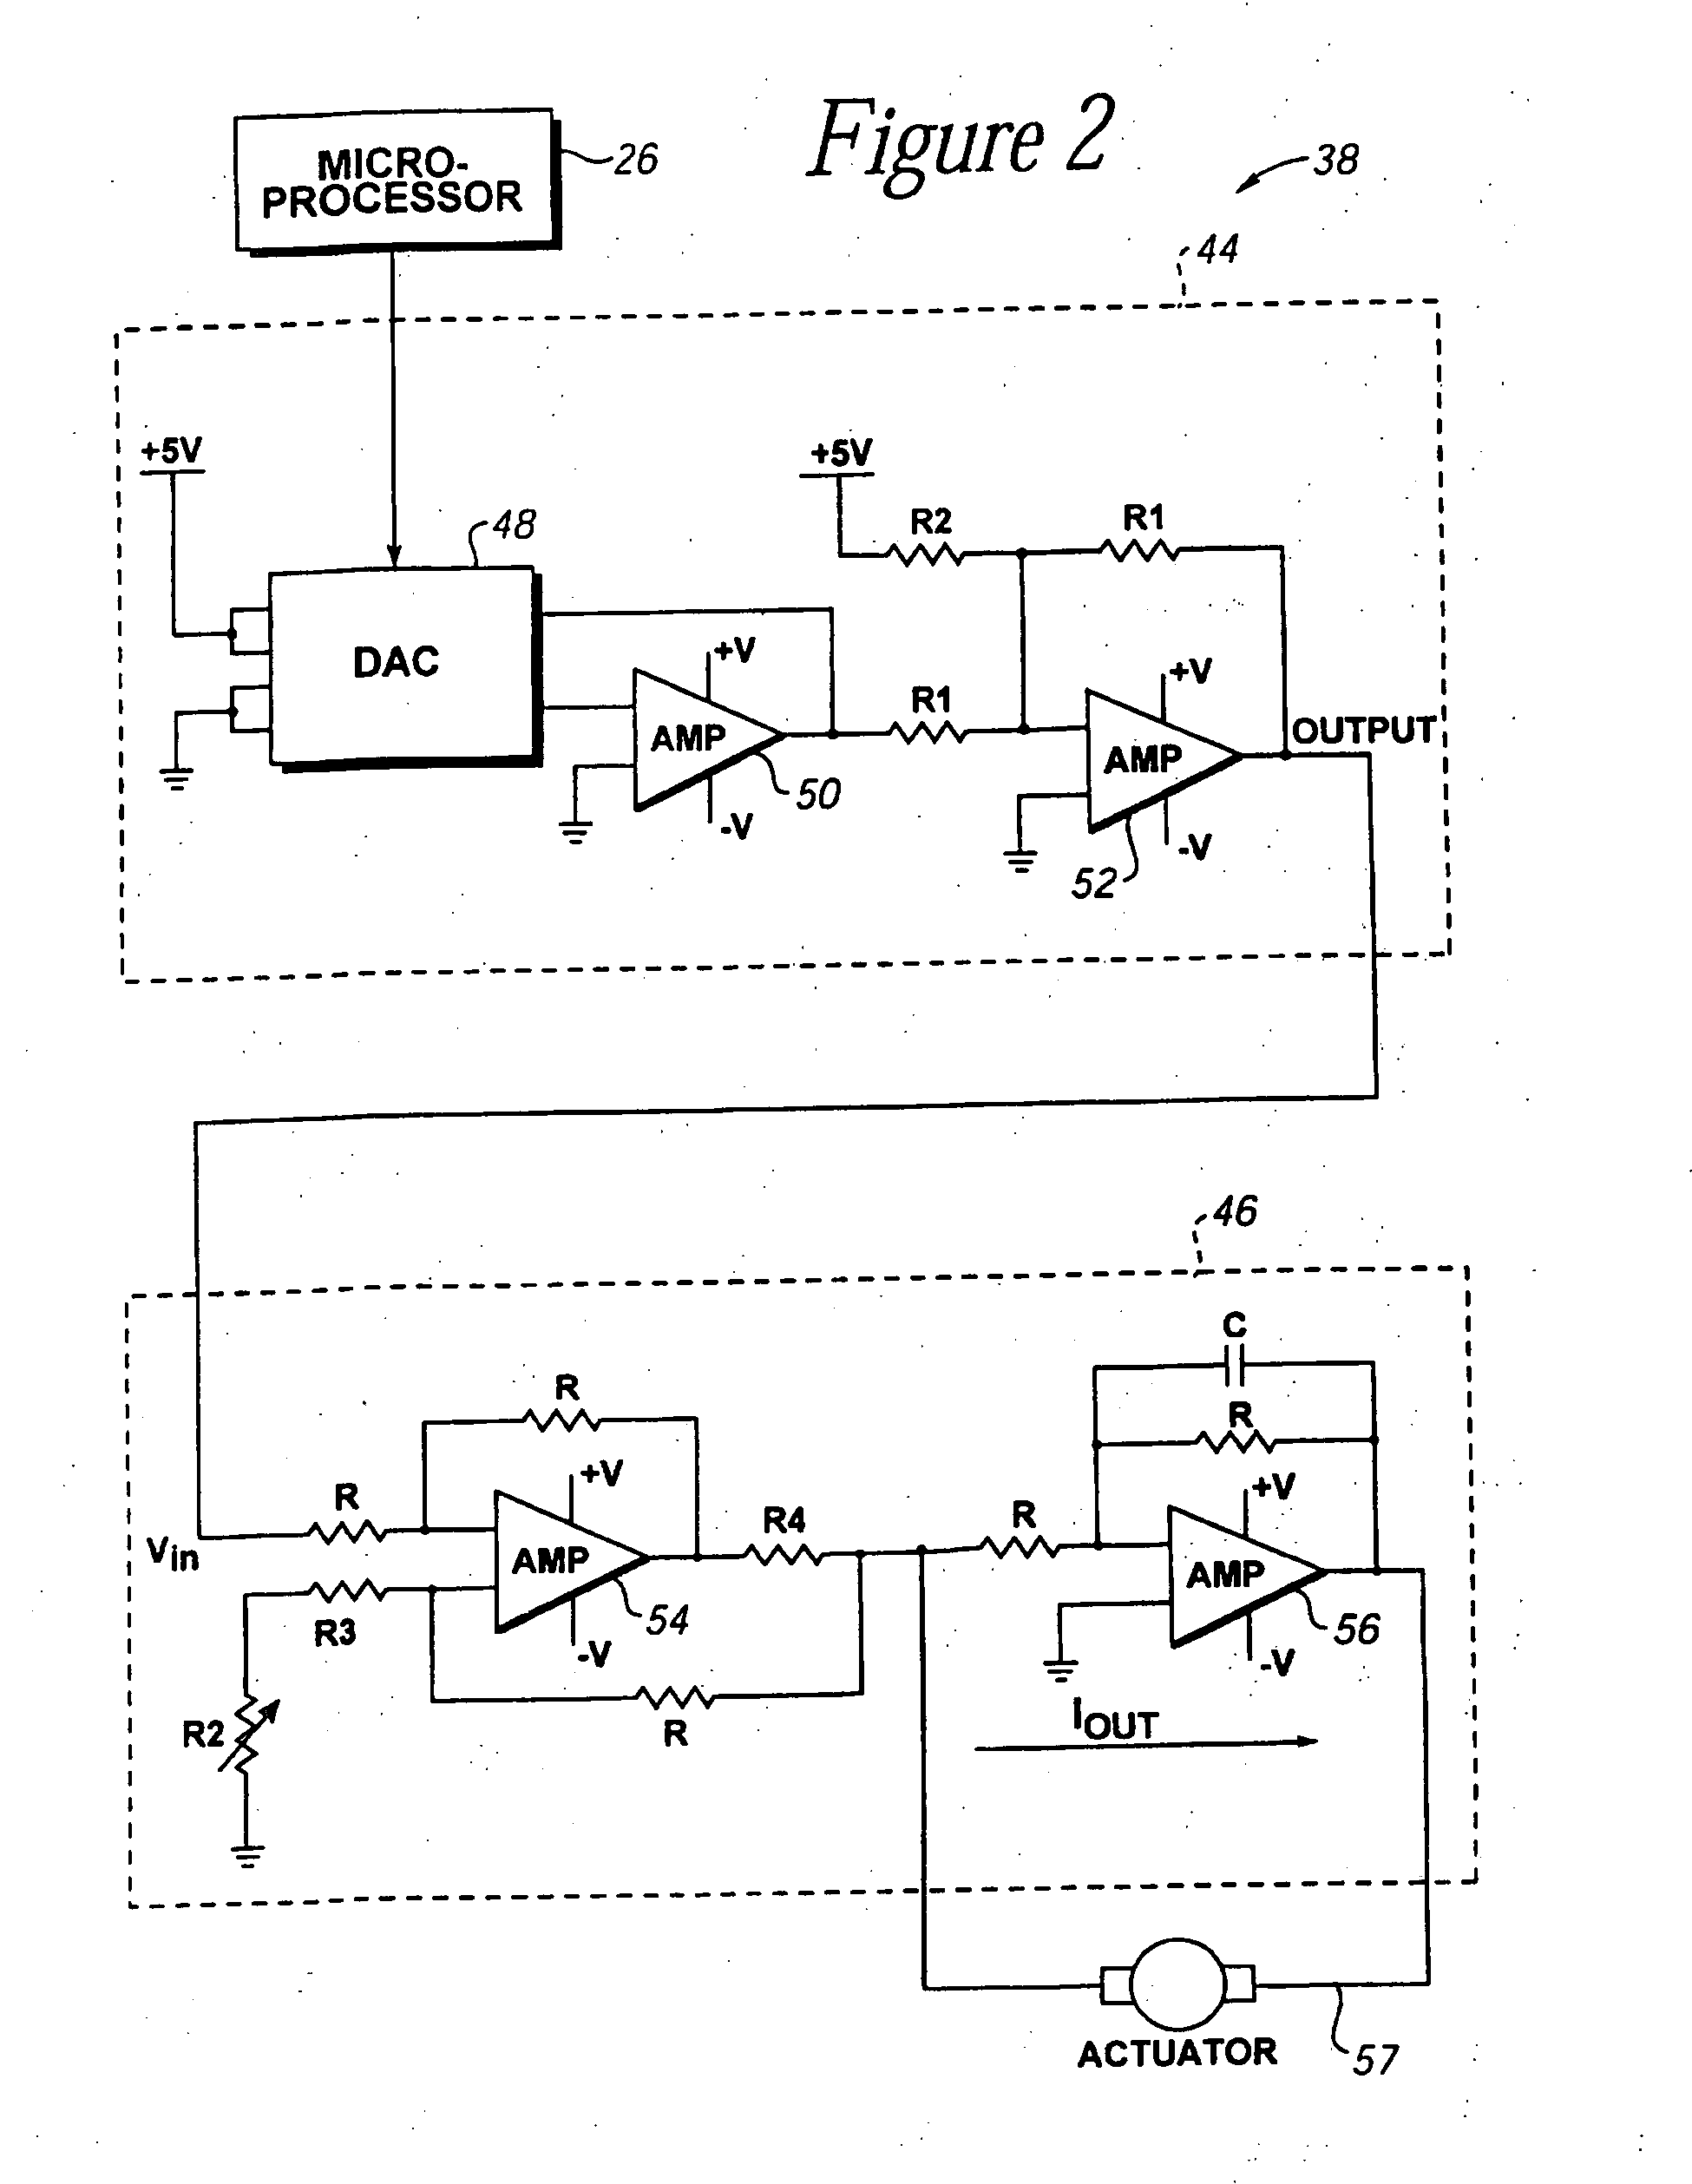 Providing force feedback to a user of an interface device based on interactions of a user-controlled cursor in a graphical user interface